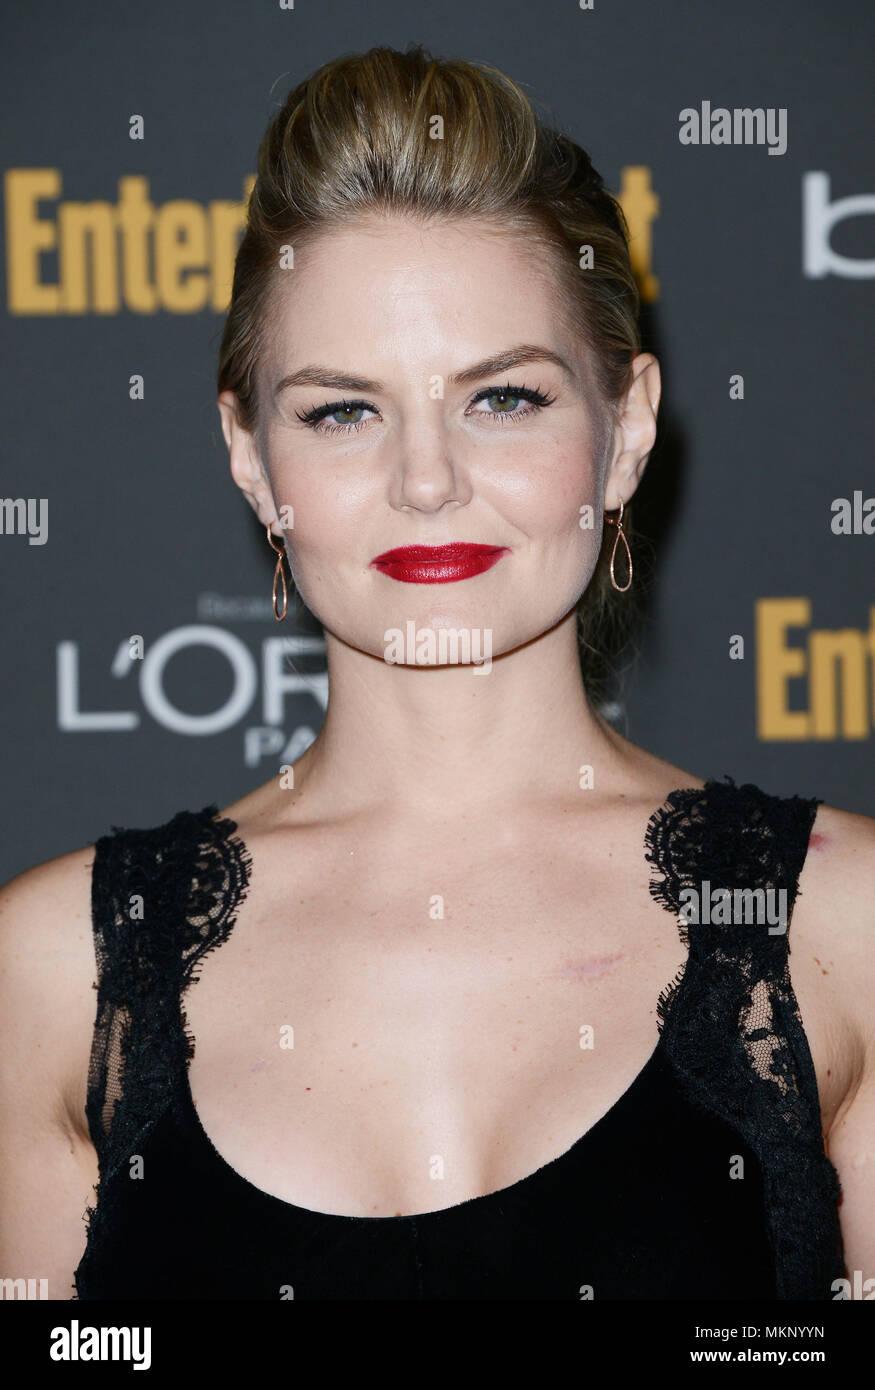 Jennifer Morrison 145 at the EW and WIF Pre-Emmy Party  at the BOA Steakhouse in Los Angeles.Jennifer Morrison 145 Red Carpet Event, Vertical, USA, Film Industry, Celebrities,  Photography, Bestof, Arts Culture and Entertainment, Topix Celebrities fashion /  Vertical, Best of, Event in Hollywood Life - California,  Red Carpet and backstage, USA, Film Industry, Celebrities,  movie celebrities, TV celebrities, Music celebrities, Photography, Bestof, Arts Culture and Entertainment,  Topix, headshot, vertical, one person,, from the year , 2013, inquiry tsuni@Gamma-USA.com Stock Photo